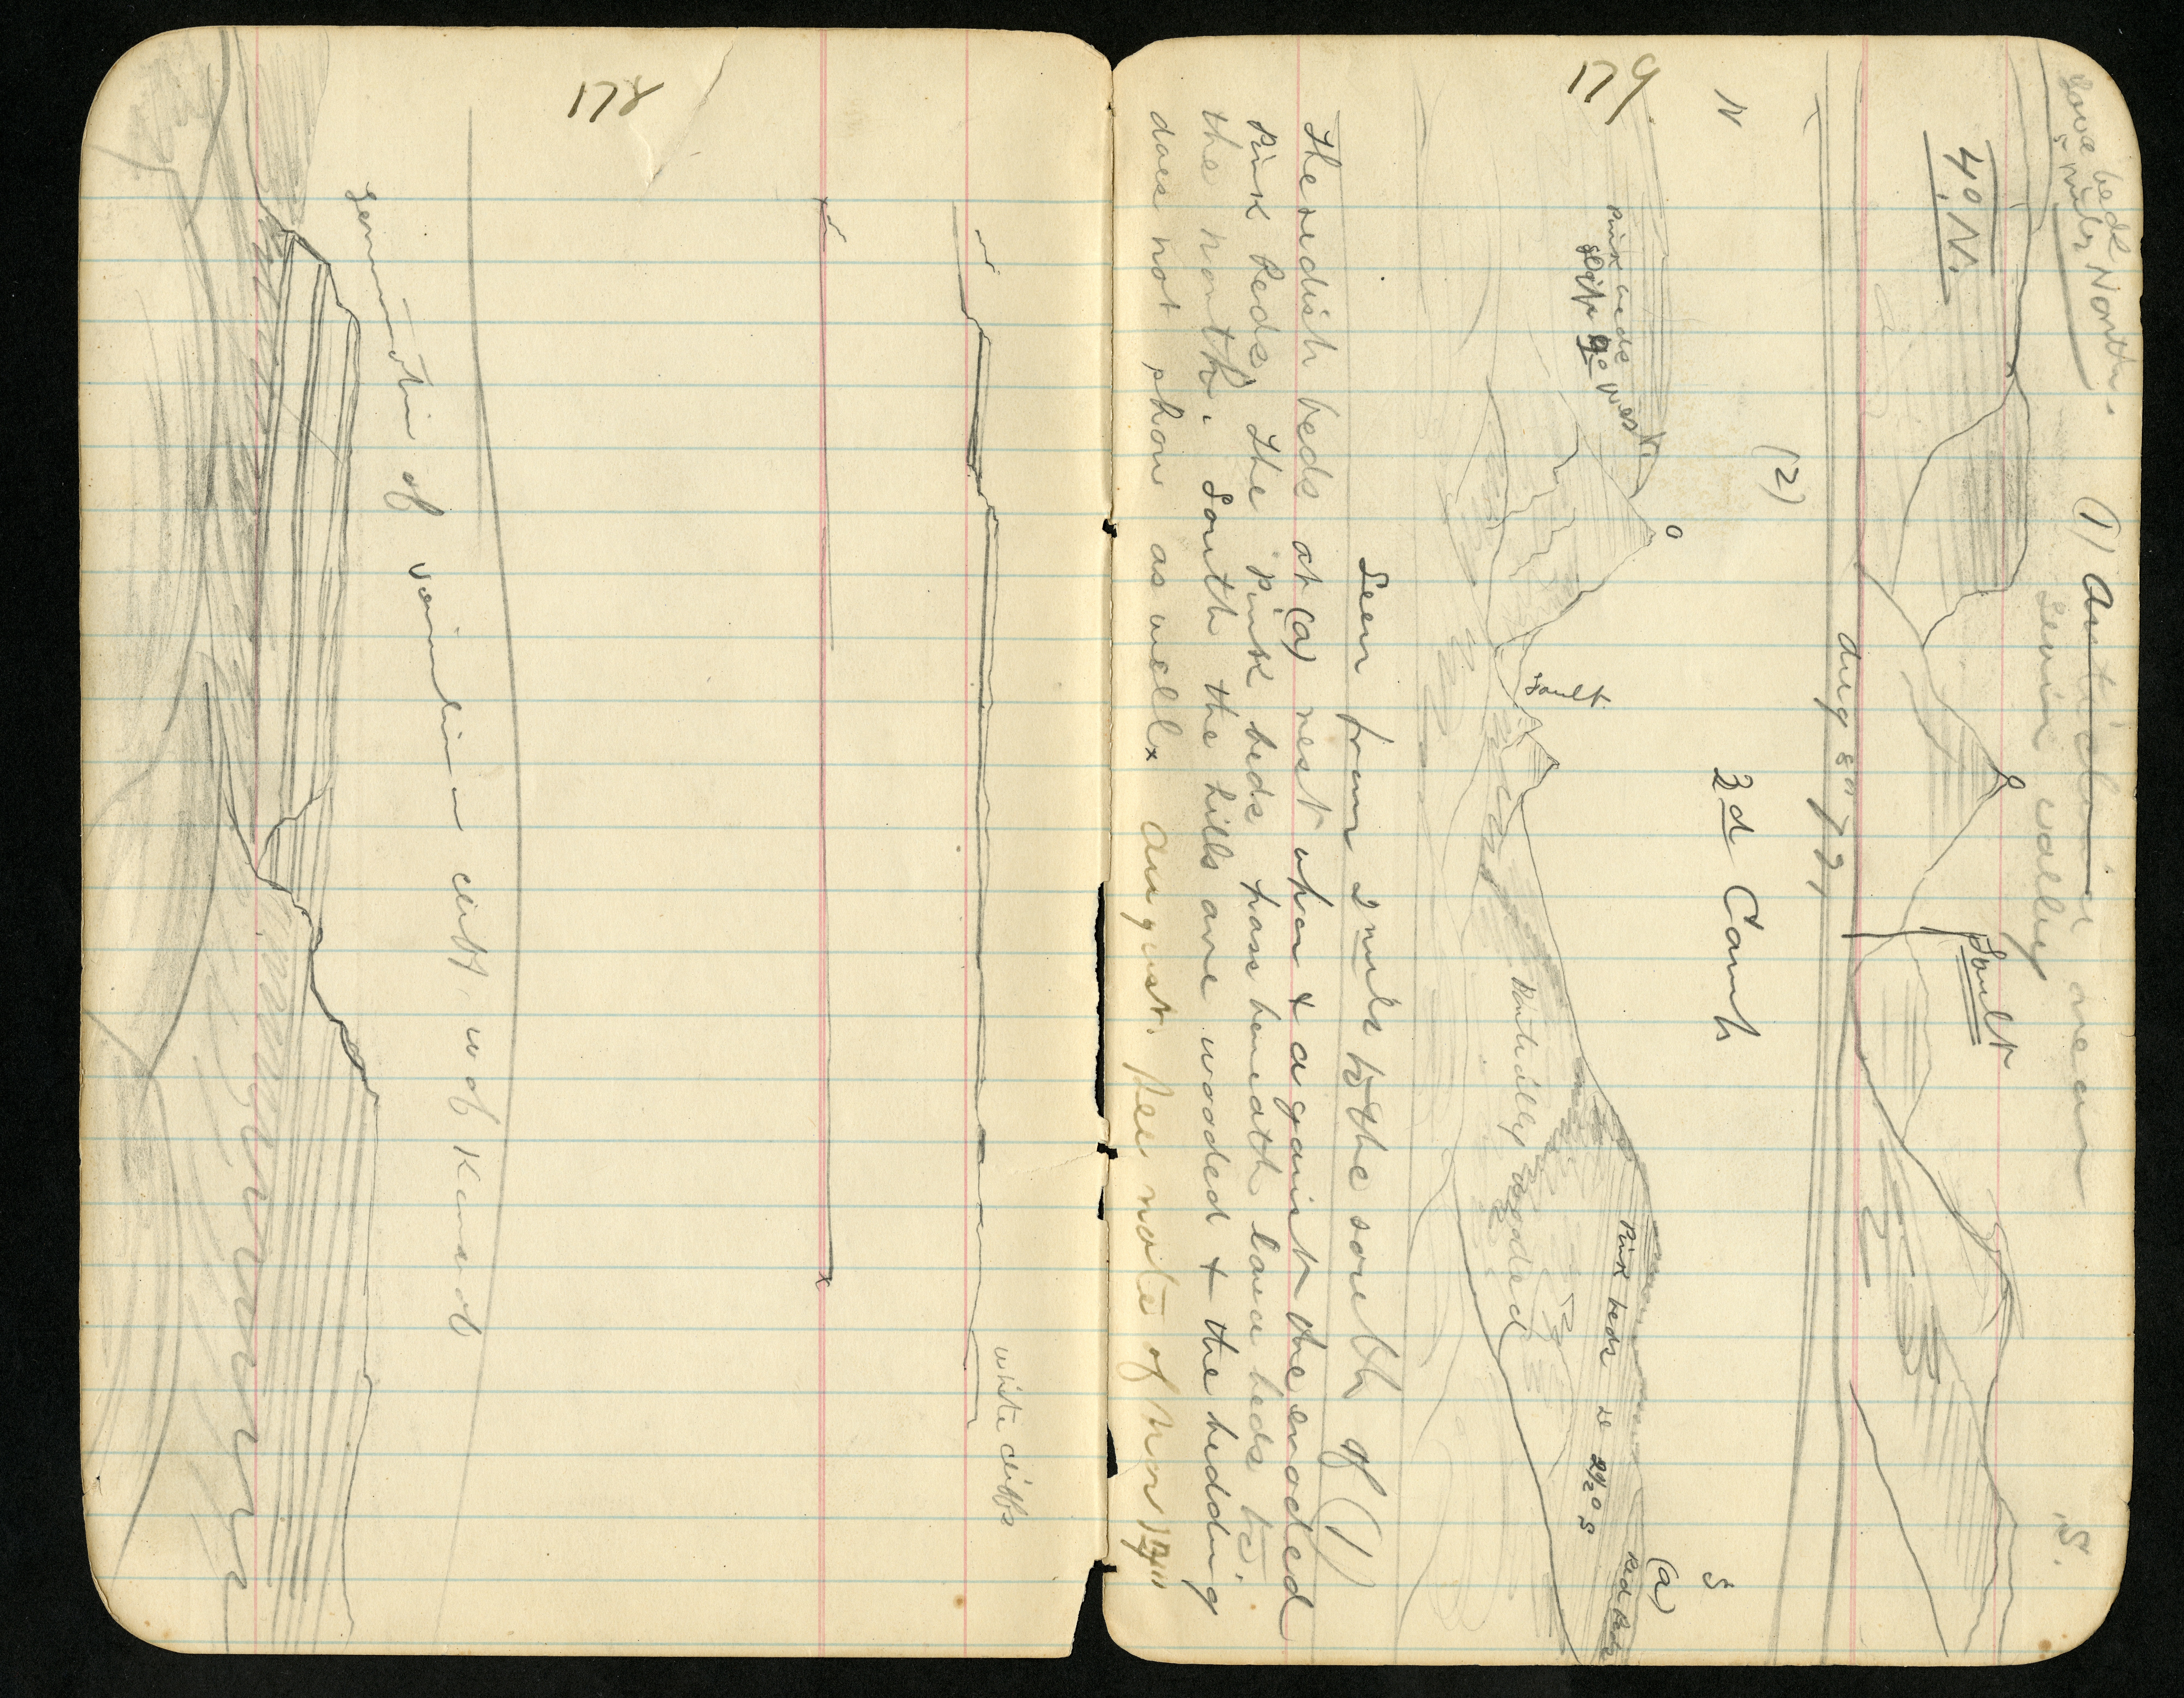 Charles D. Walcott field book, observations of the Grand Canyon in 1879 while in the employ of the U